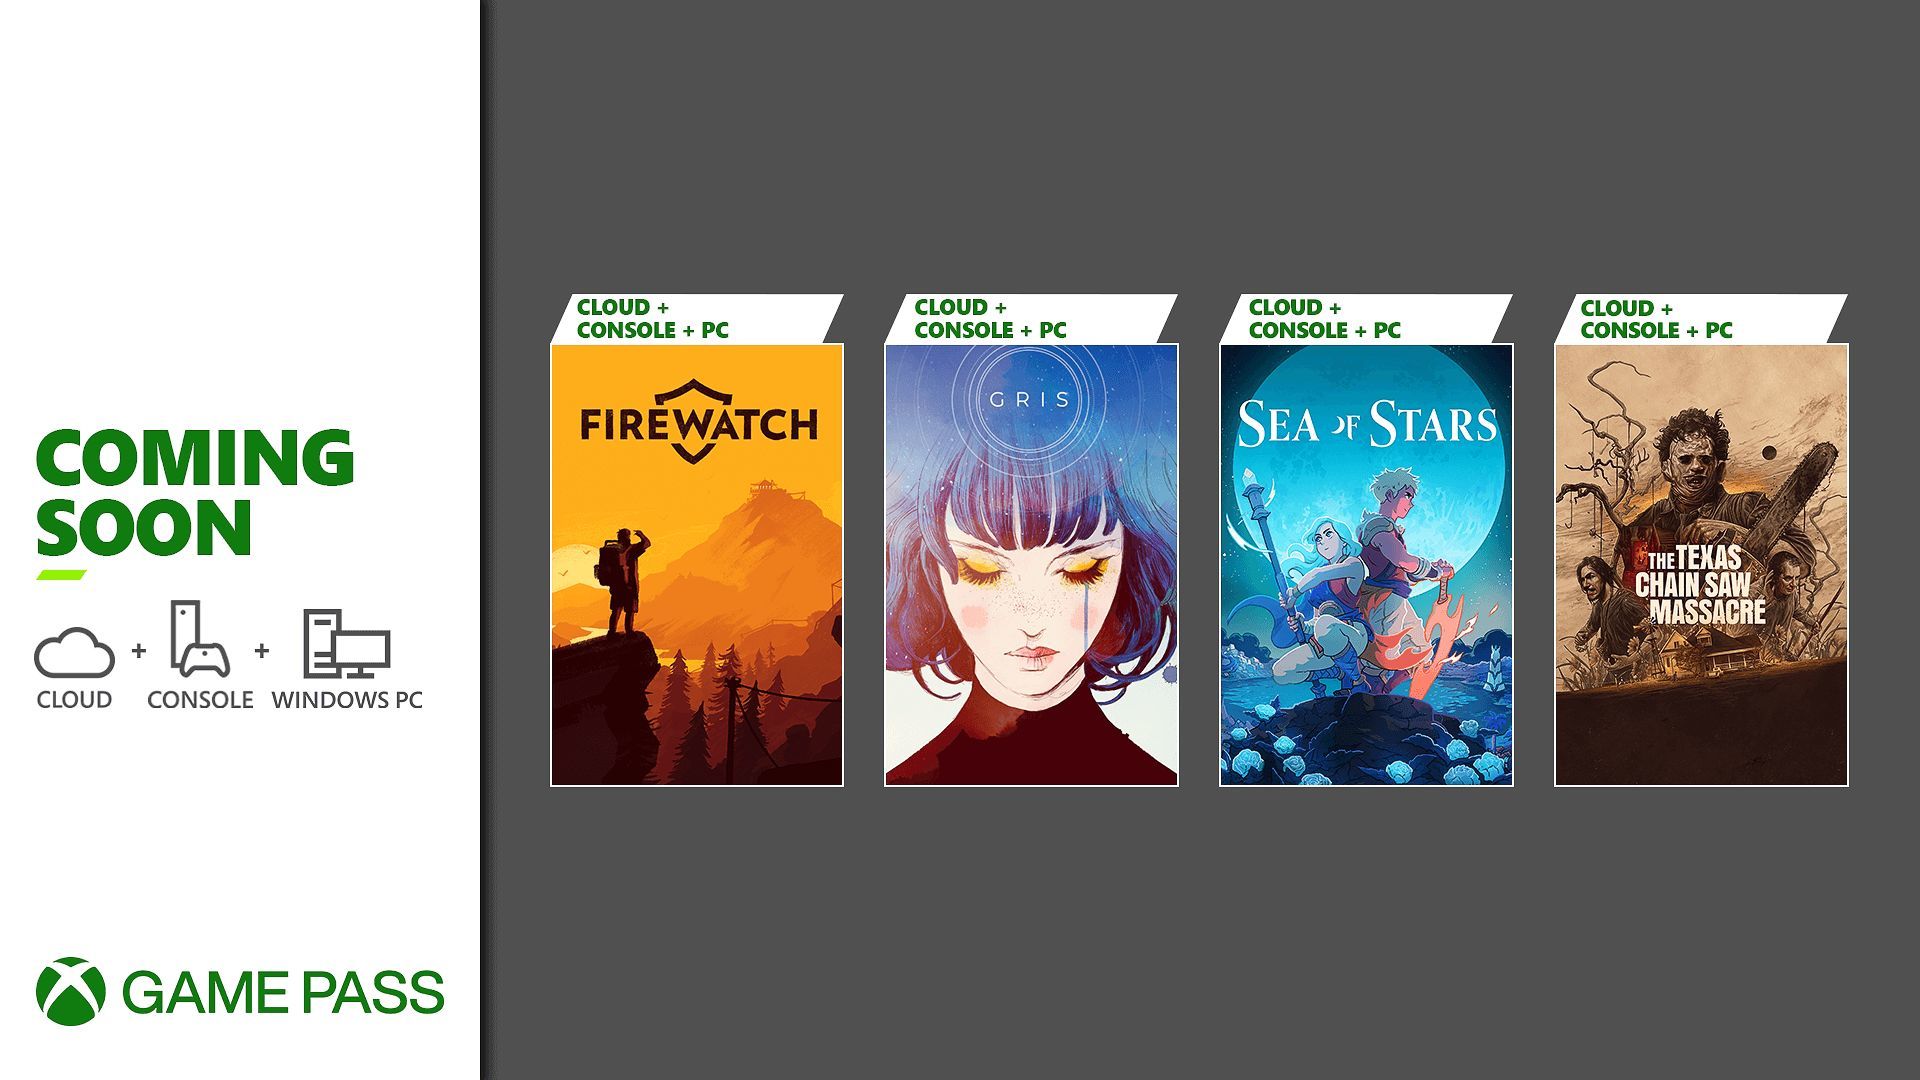 Firewatch and GRIS are two of the best games to join Game Pass before Starfield –